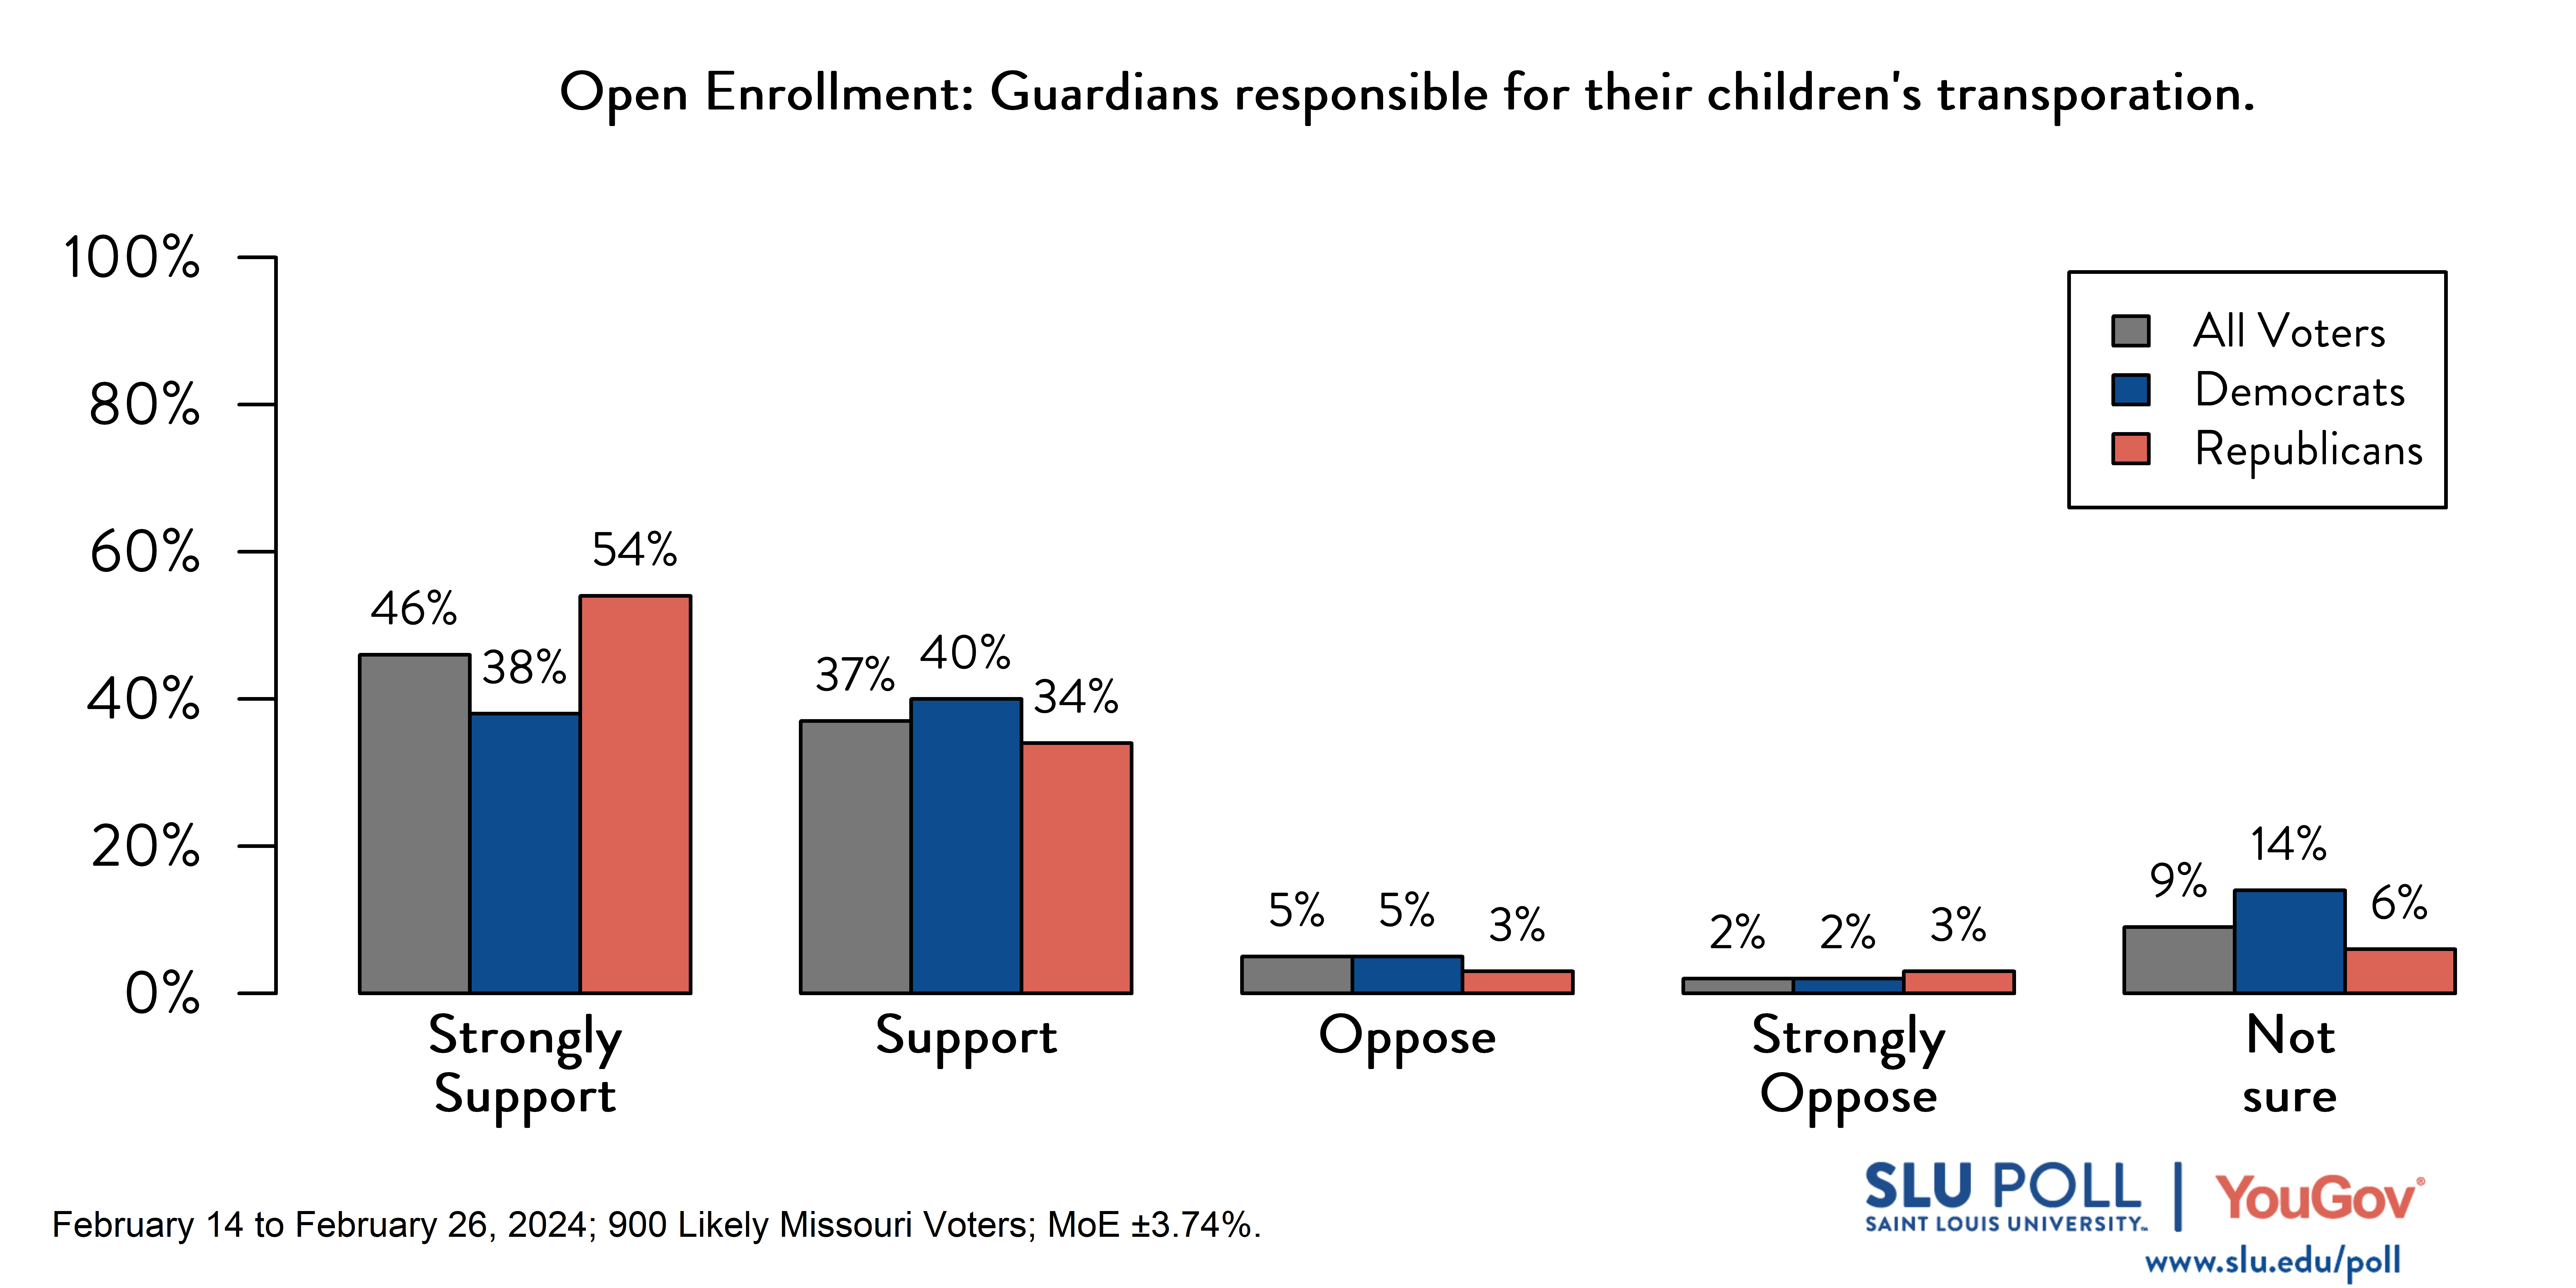 Likely voters' responses to 'If Missouri allows students to enroll in public schools outside of their resident school districts (that is, the district where they live), indicate whether you support or oppose the following…Transferring students or their guardians should be responsible for transportation to and from nonresident districts?': 46% Strongly support, 37% Support, 5% Oppose, 2% Strongly oppose, and 9% Not sure. Democratic voters' responses: ' 38% Strongly support, 40% Support, 5% Oppose, 2% Strongly oppose, and 14% Not sure. Republican voters' responses:  54% Strongly support, 34% Support, 3% Oppose, 3% Strongly oppose, and 6% Not sure.